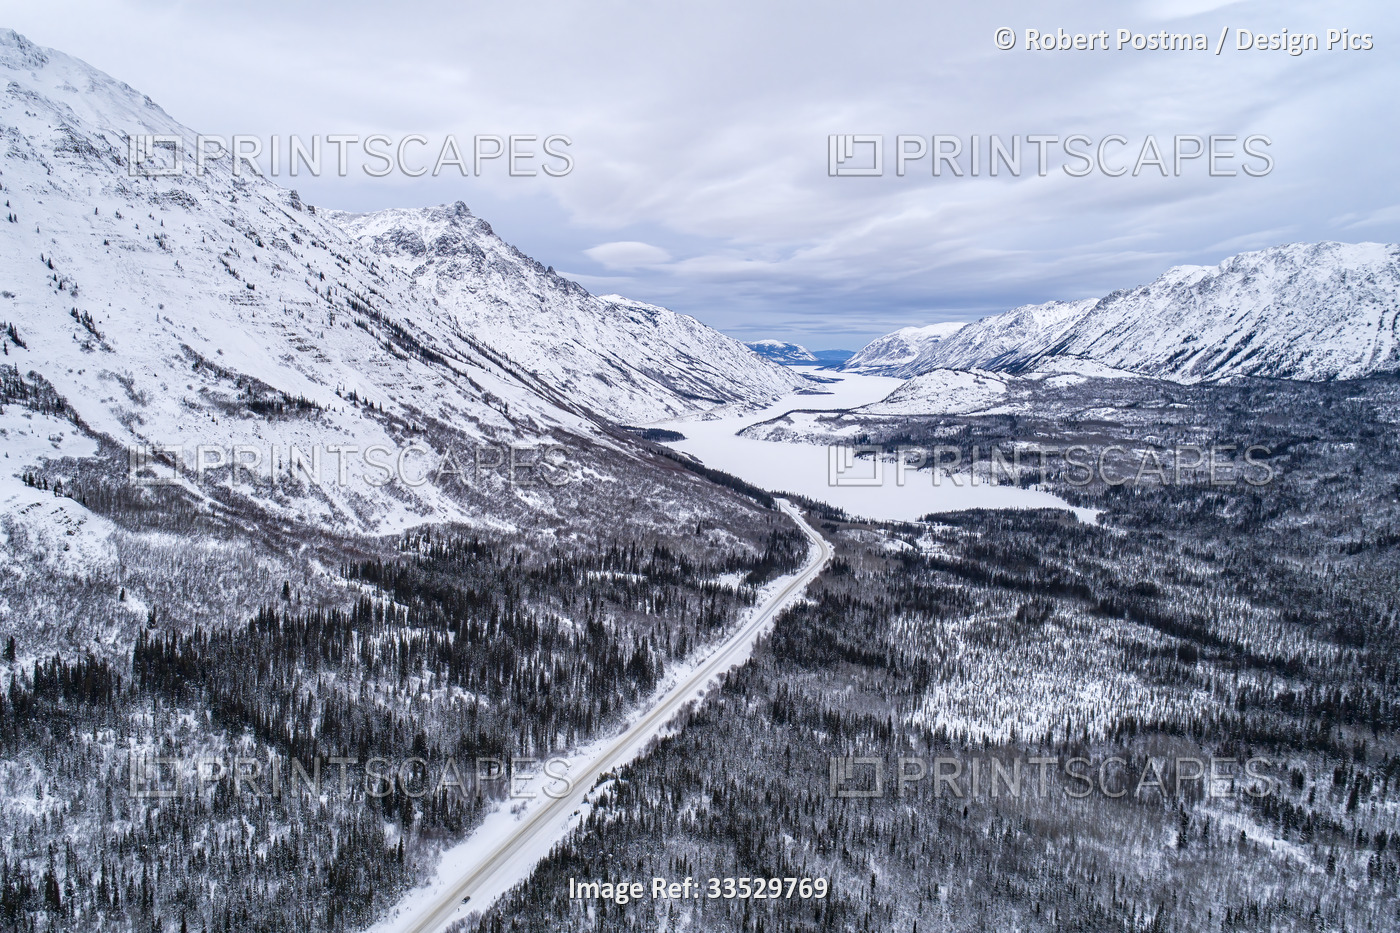 The South Klondike highway winds its way through the wintry Yukon landscape ...